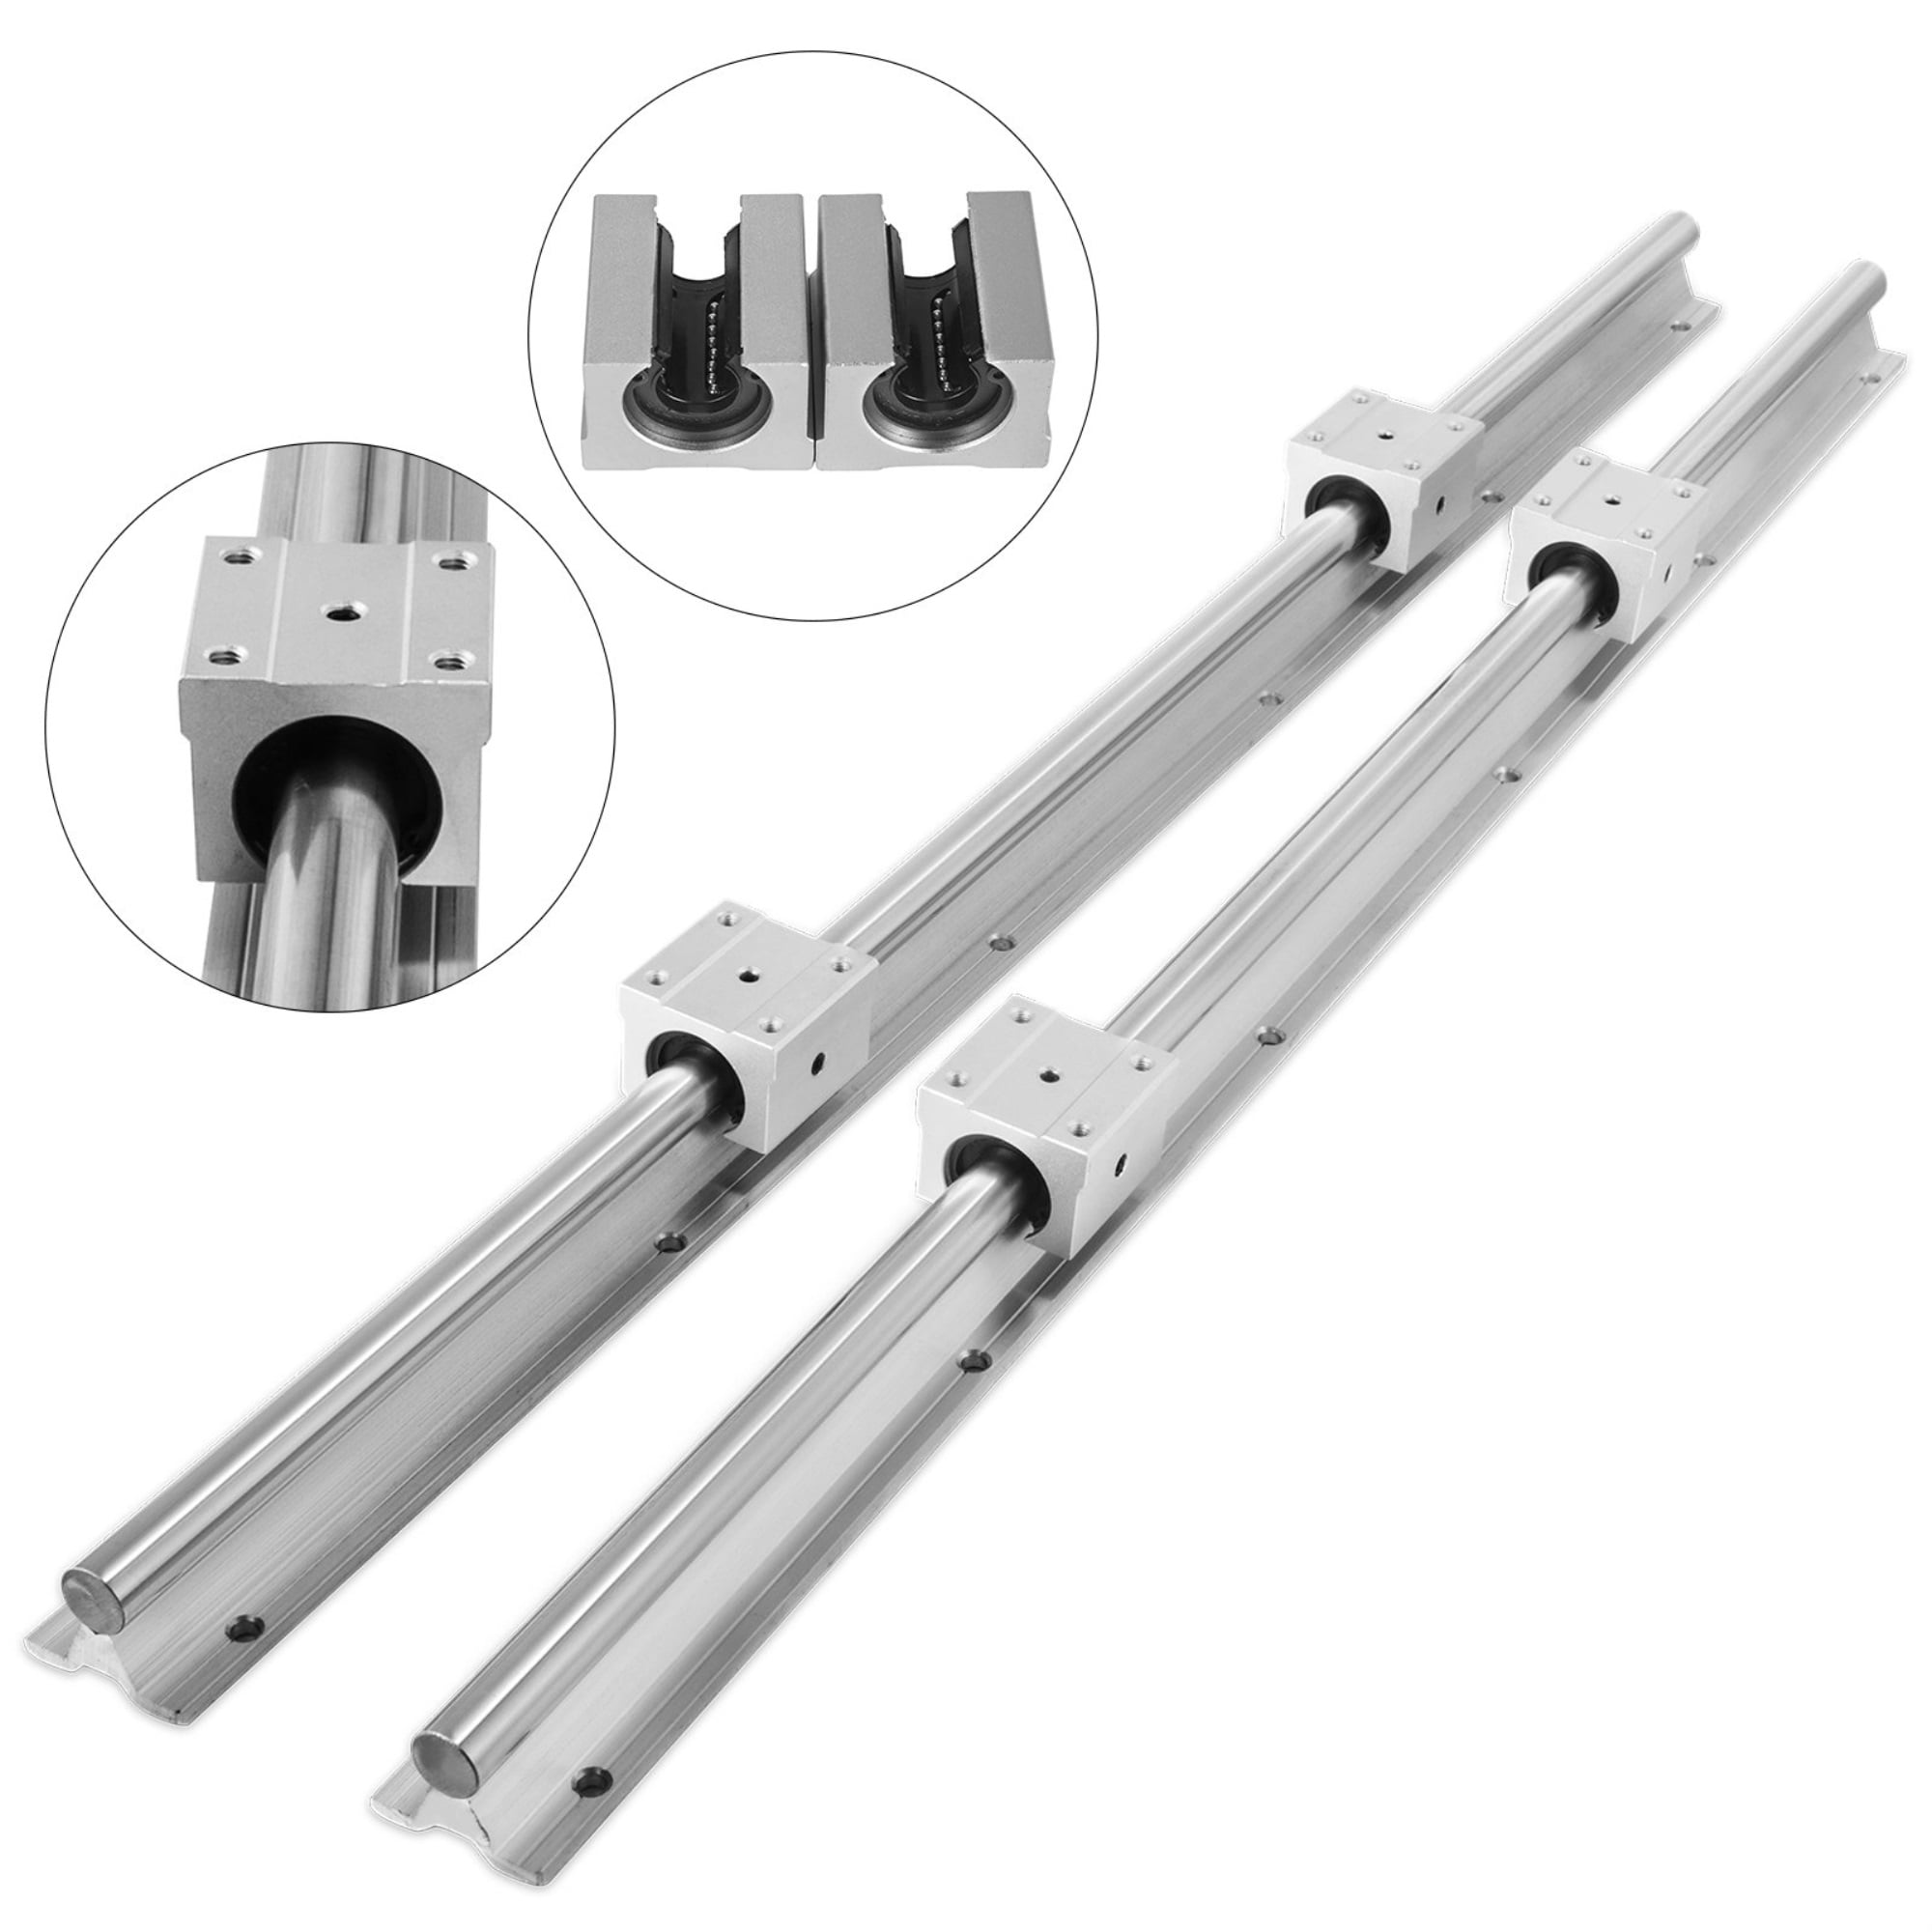 SBR16-600 mm 2 x Linear Rail 4 x Bearing Block smooth sliding Routers Unique 